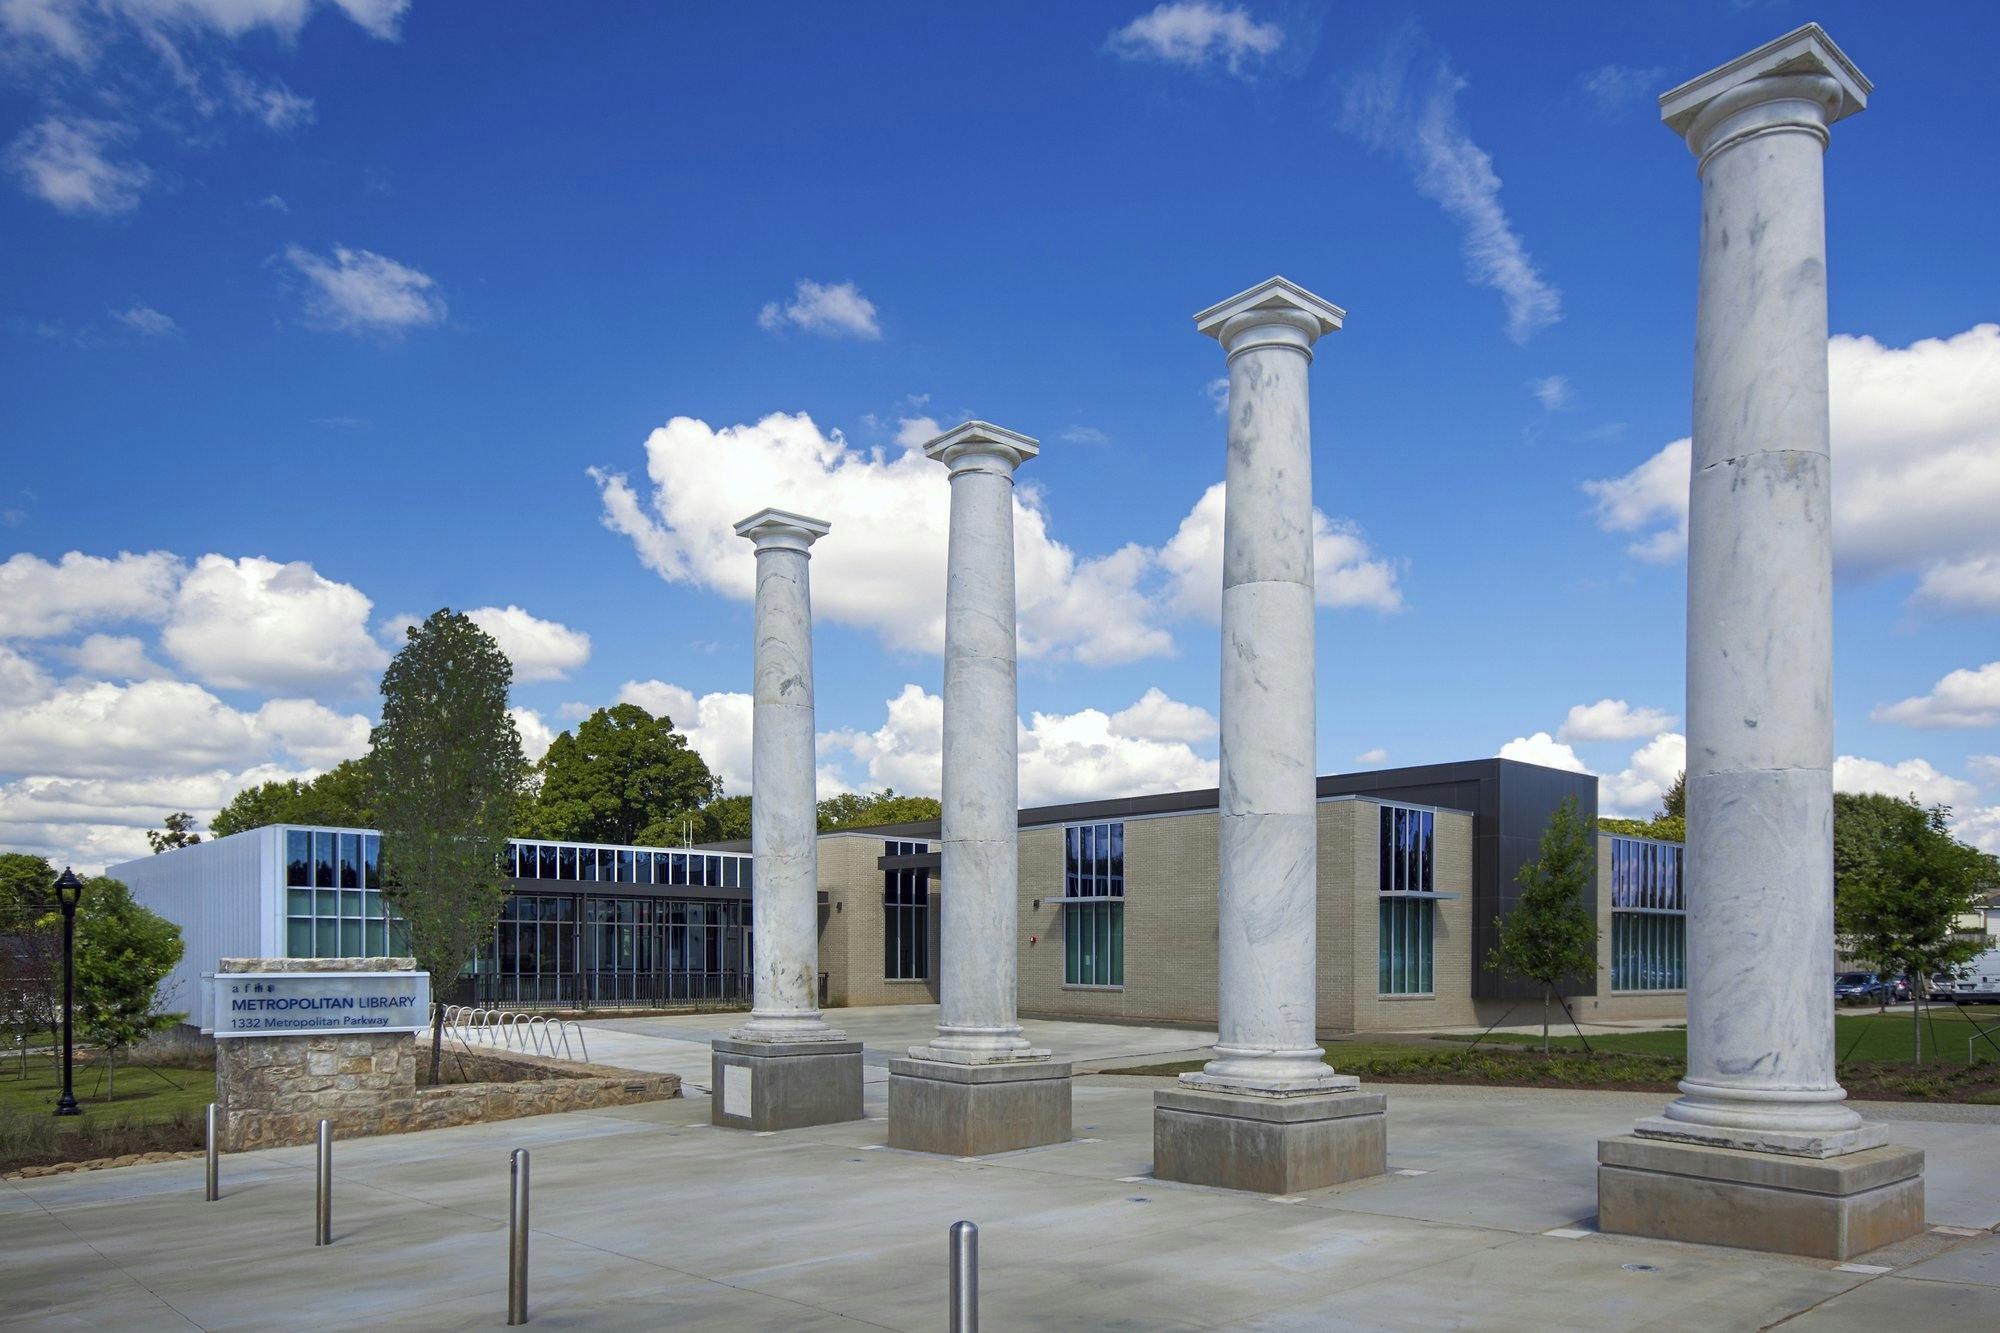 Four white granite, Doric columns from a church that was previously in the location.